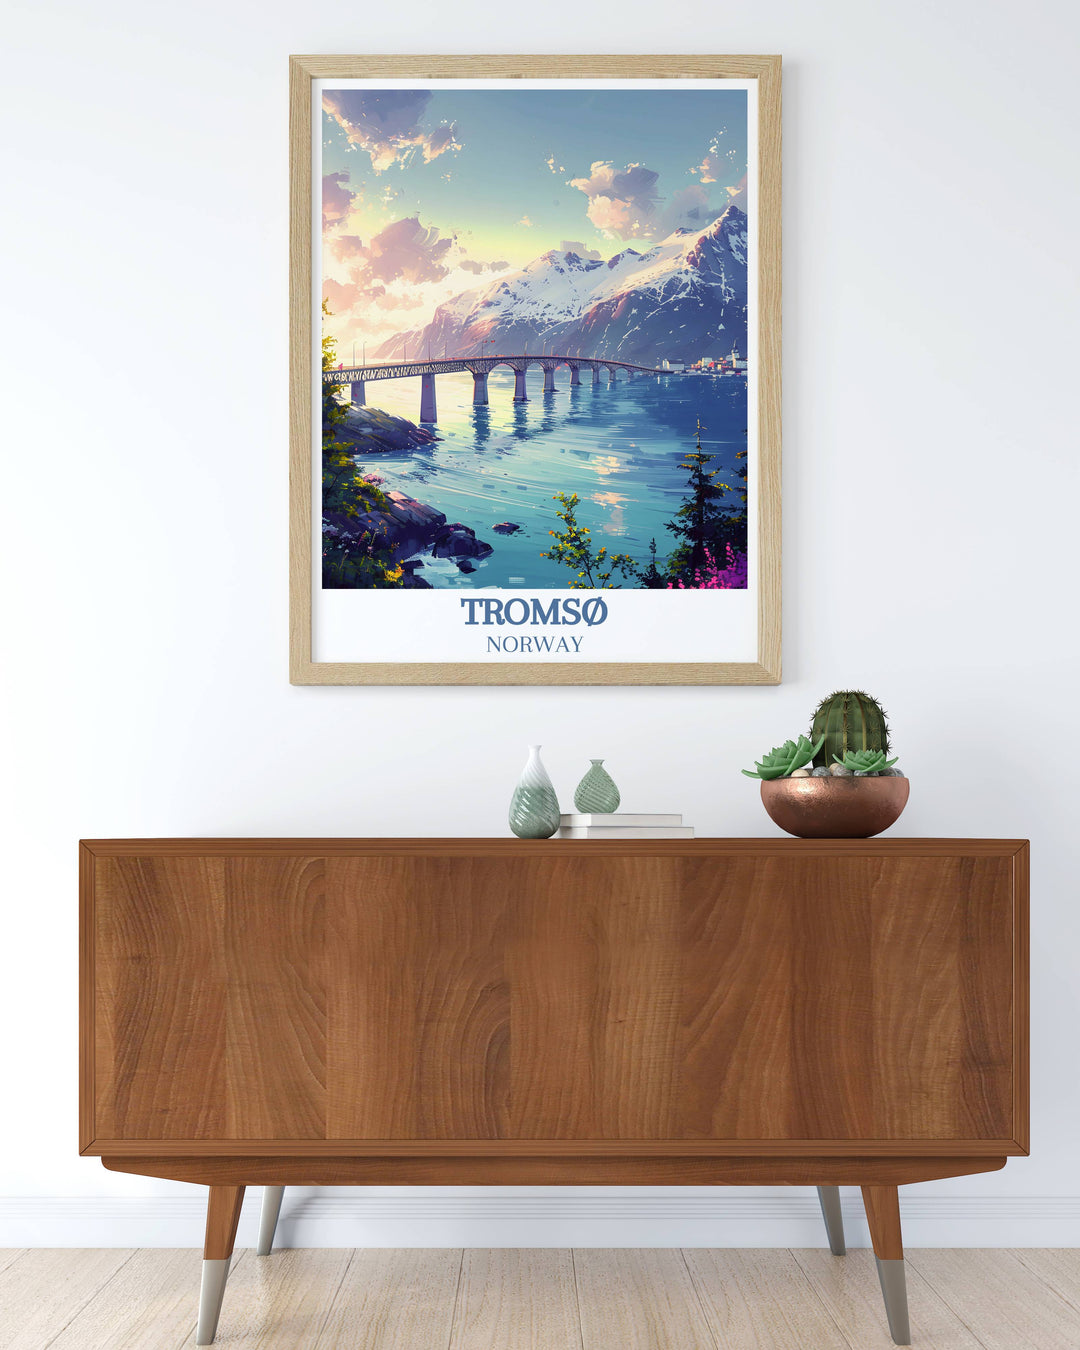 Poster showcasing the Northern Lights over Tromsø Bridge, with vibrant colors reflecting off the Arctic waters. A magical representation of one of the prime locations to witness the Aurora Borealis.